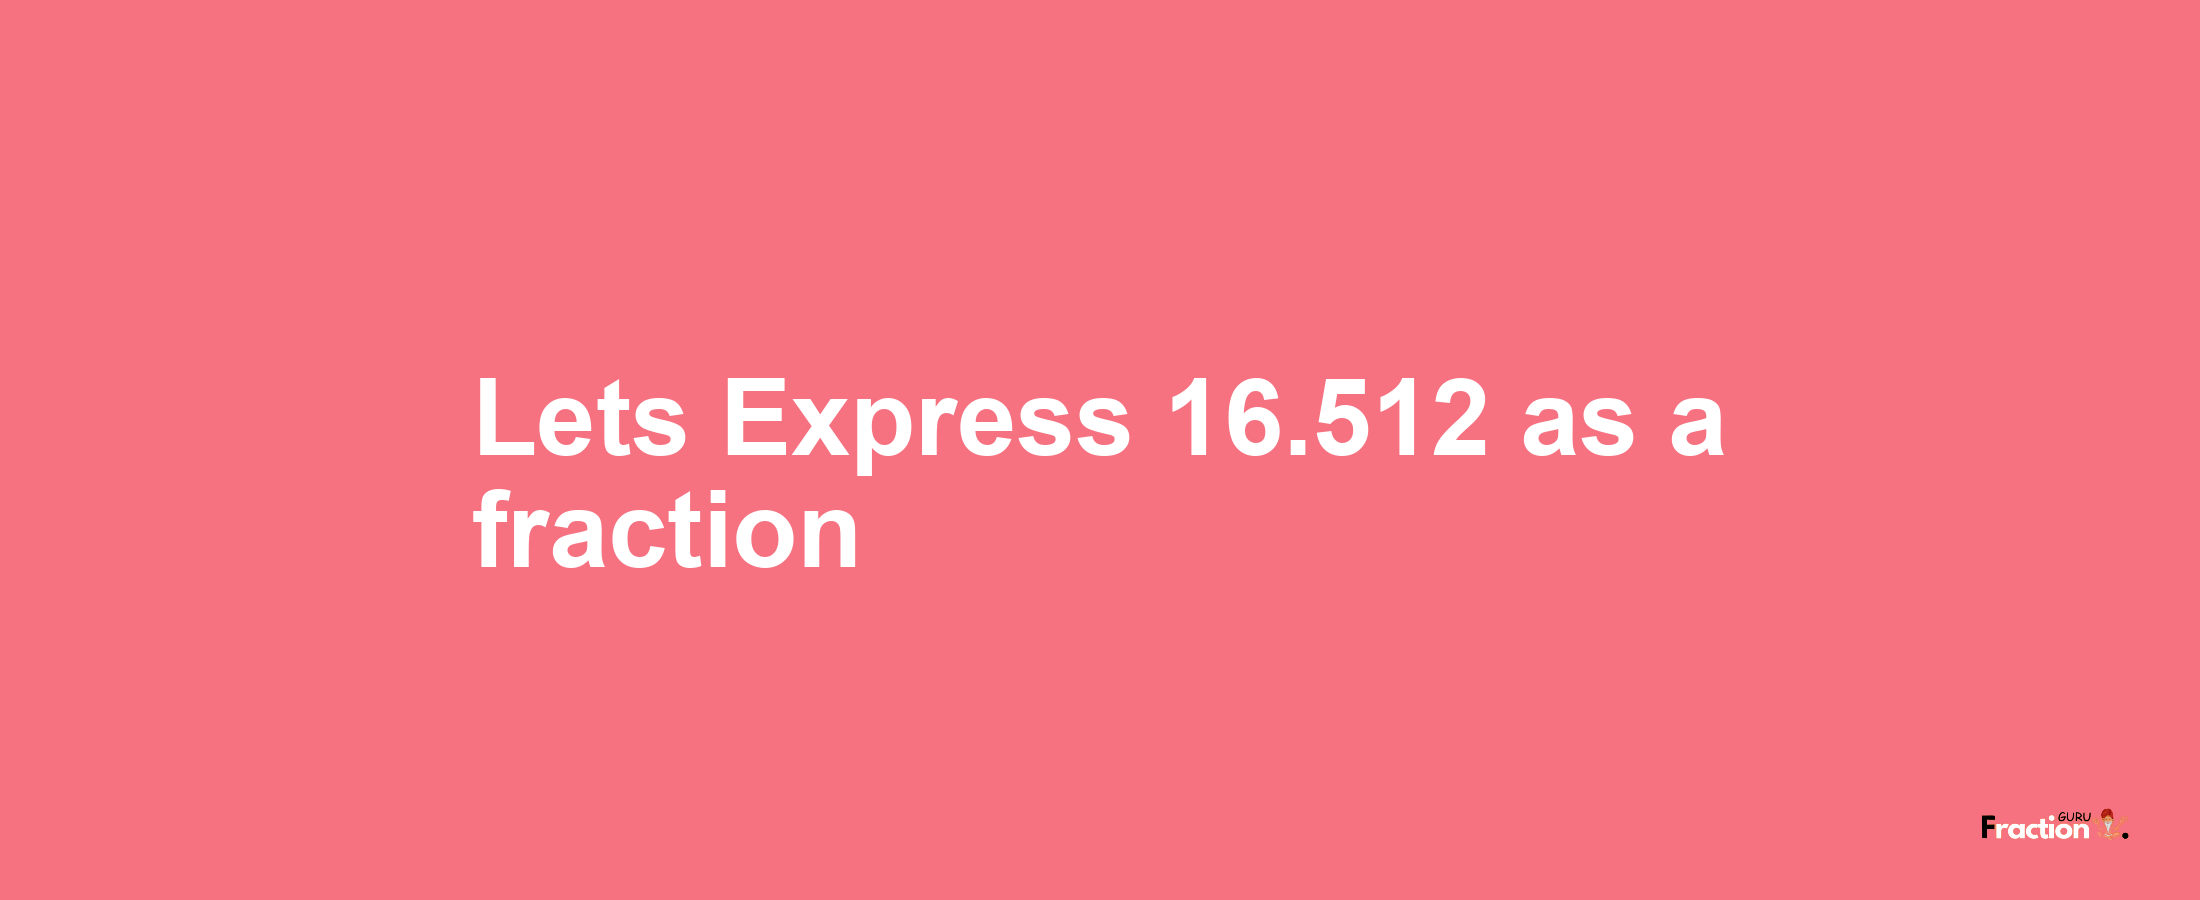 Lets Express 16.512 as afraction